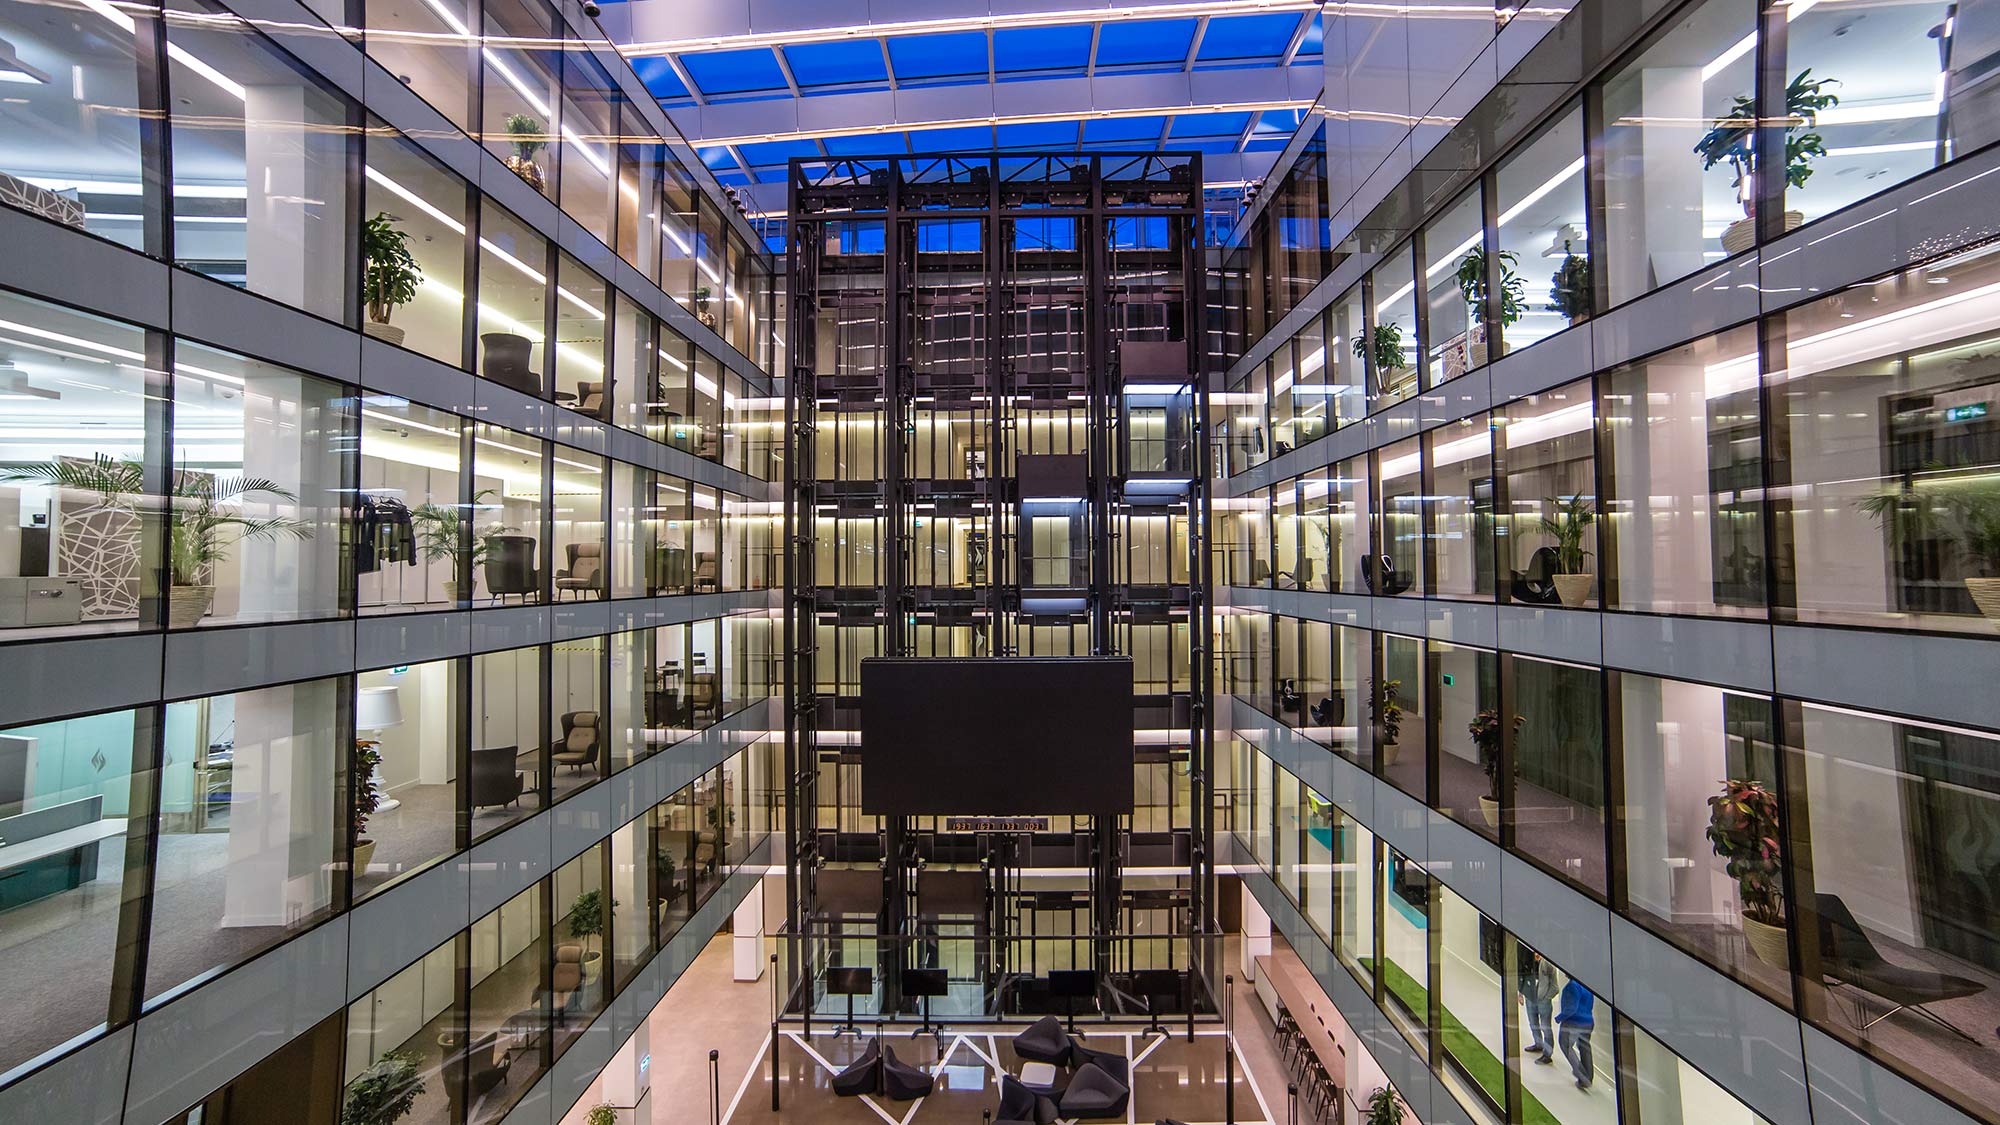 The entire atrium and ground floor of the new headquarters in St Petersburg